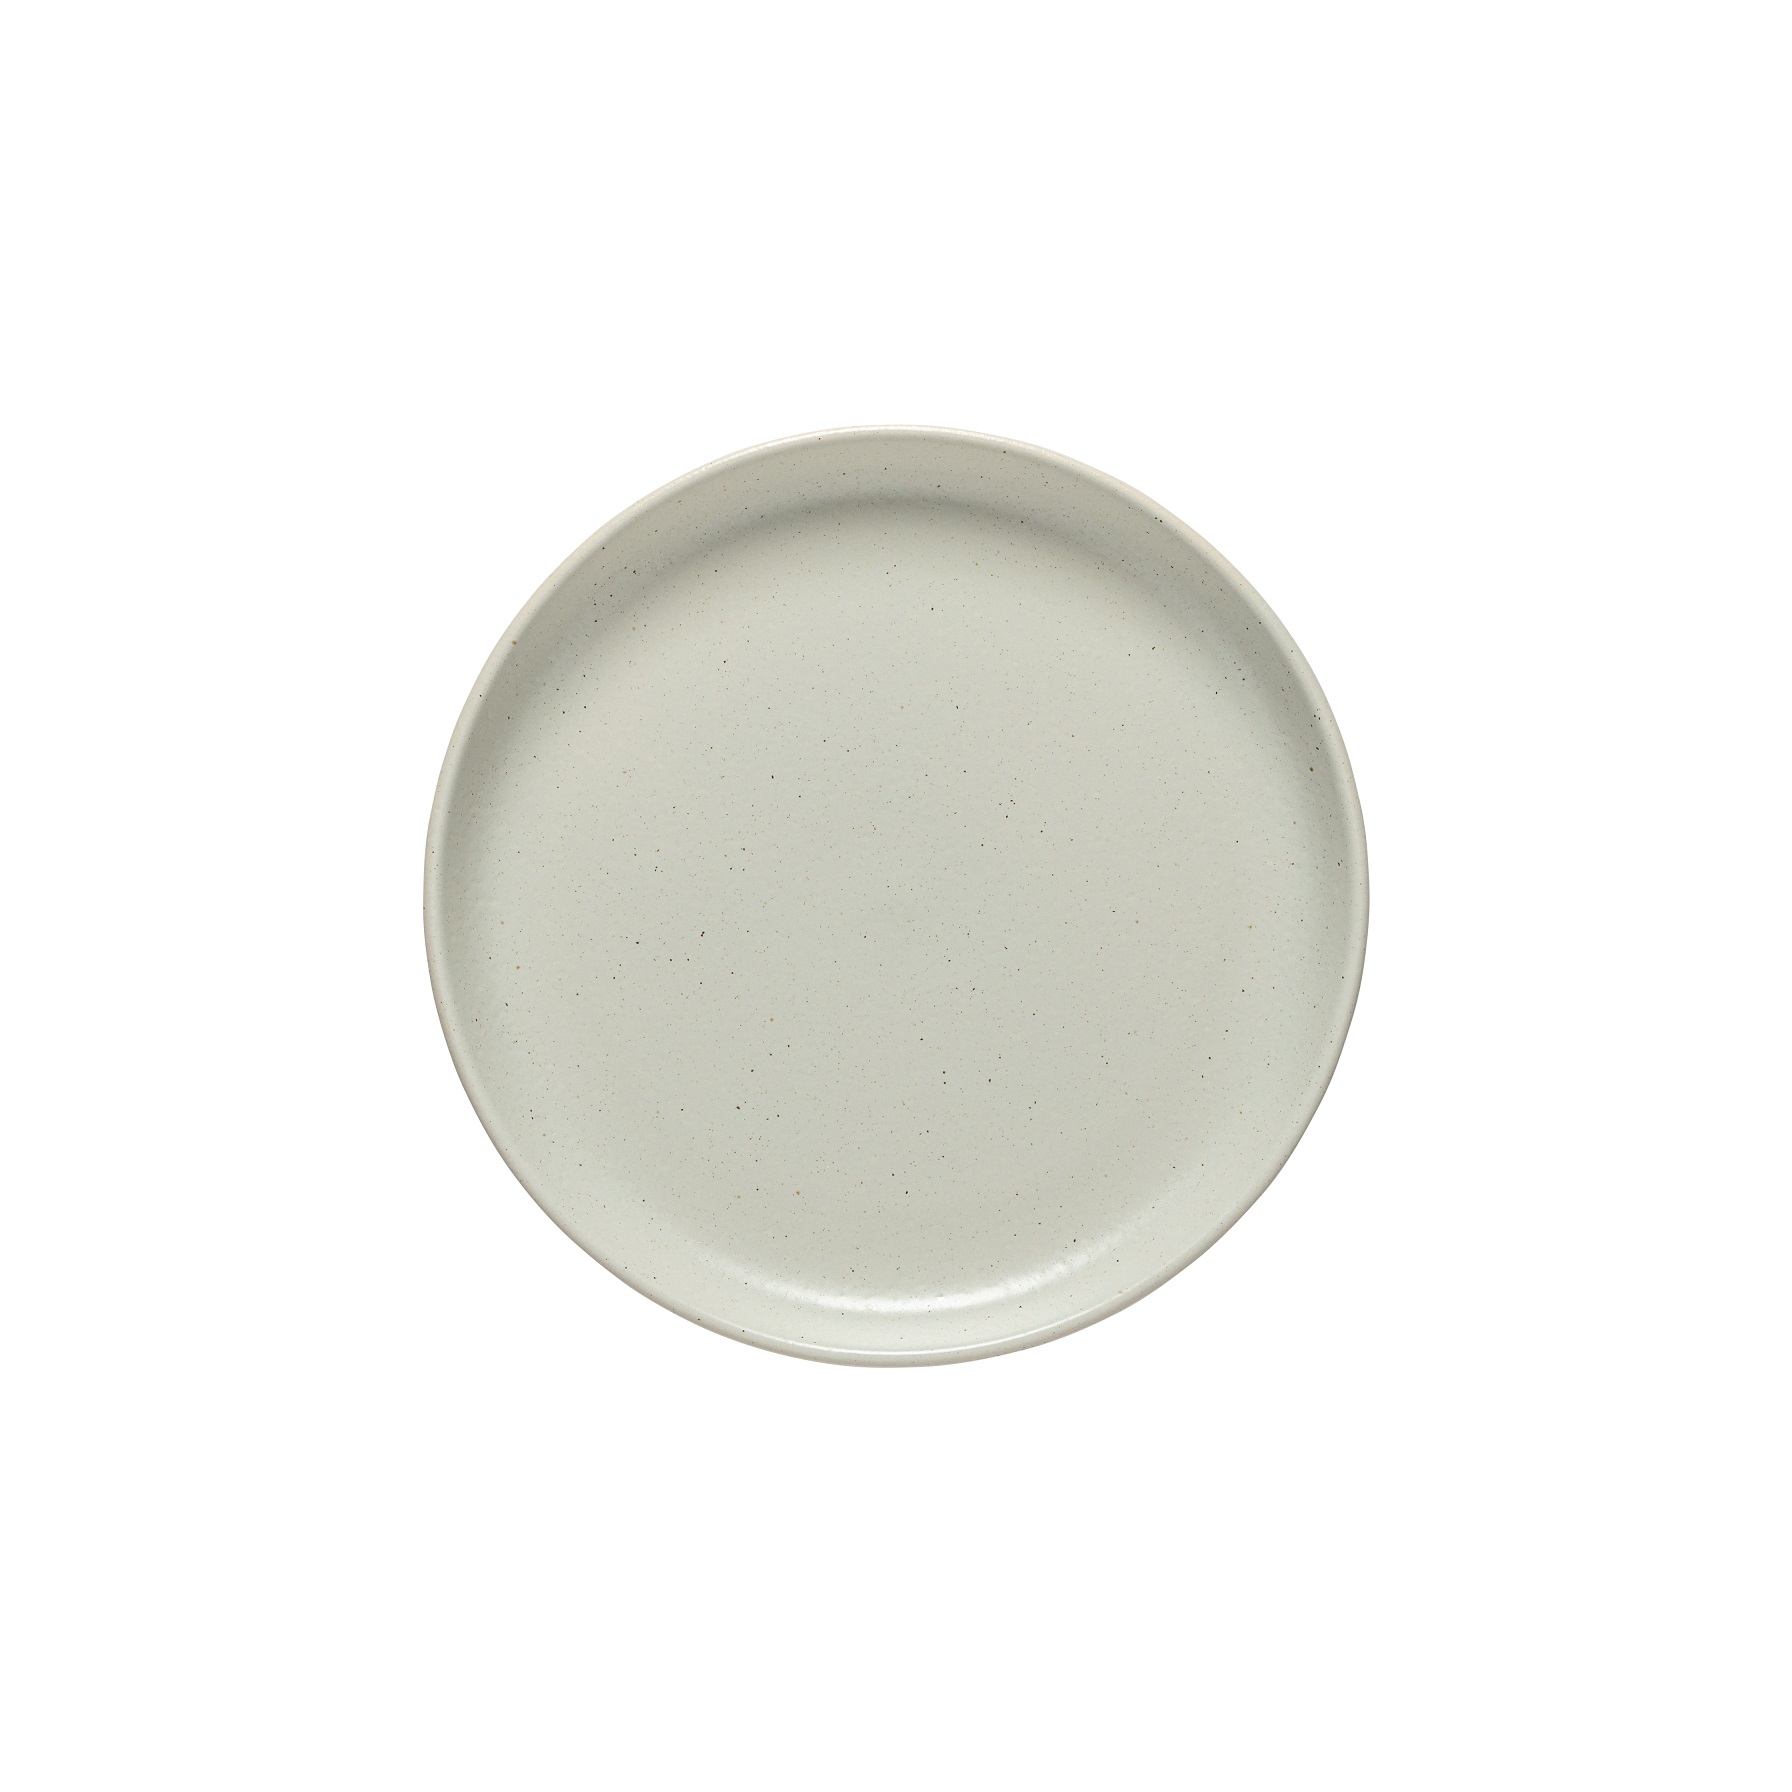 Pacifica Oyster Grey Salad Plate 23cm Gift